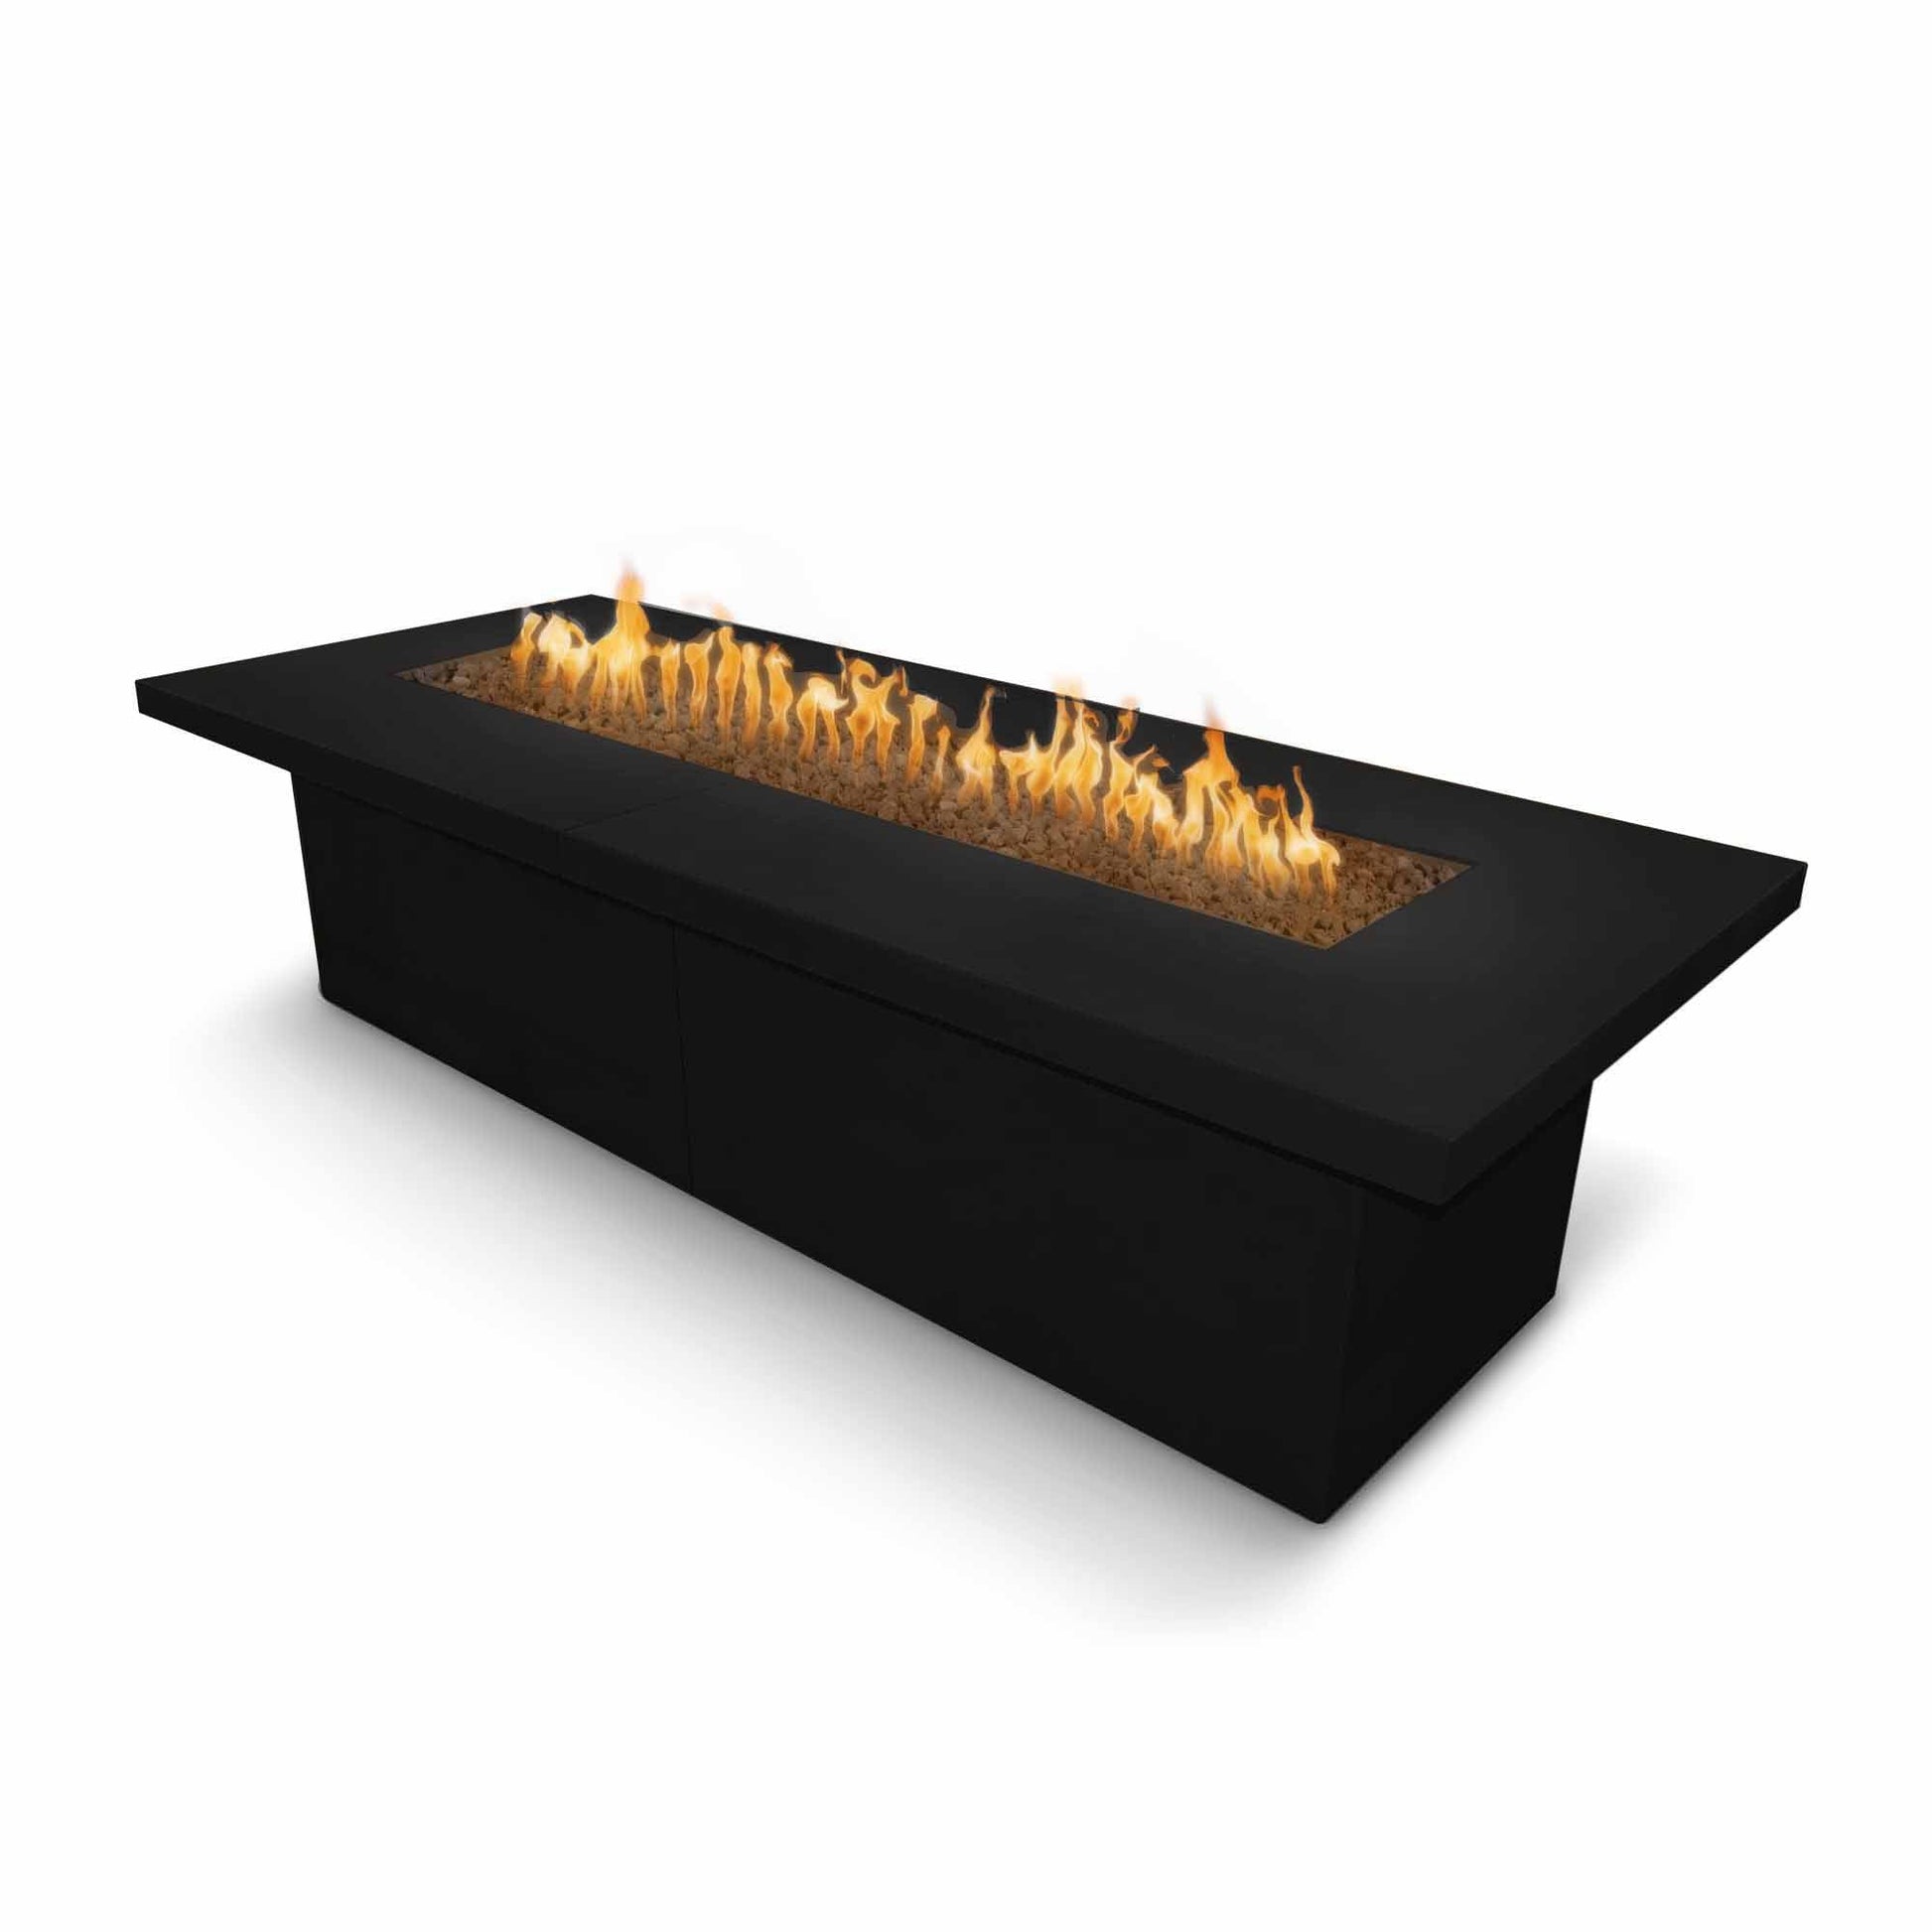 The Outdoor Plus Rectangular Newport 72" Corten Steel Natural Gas Fire Pit with 110V Electronic Ignition